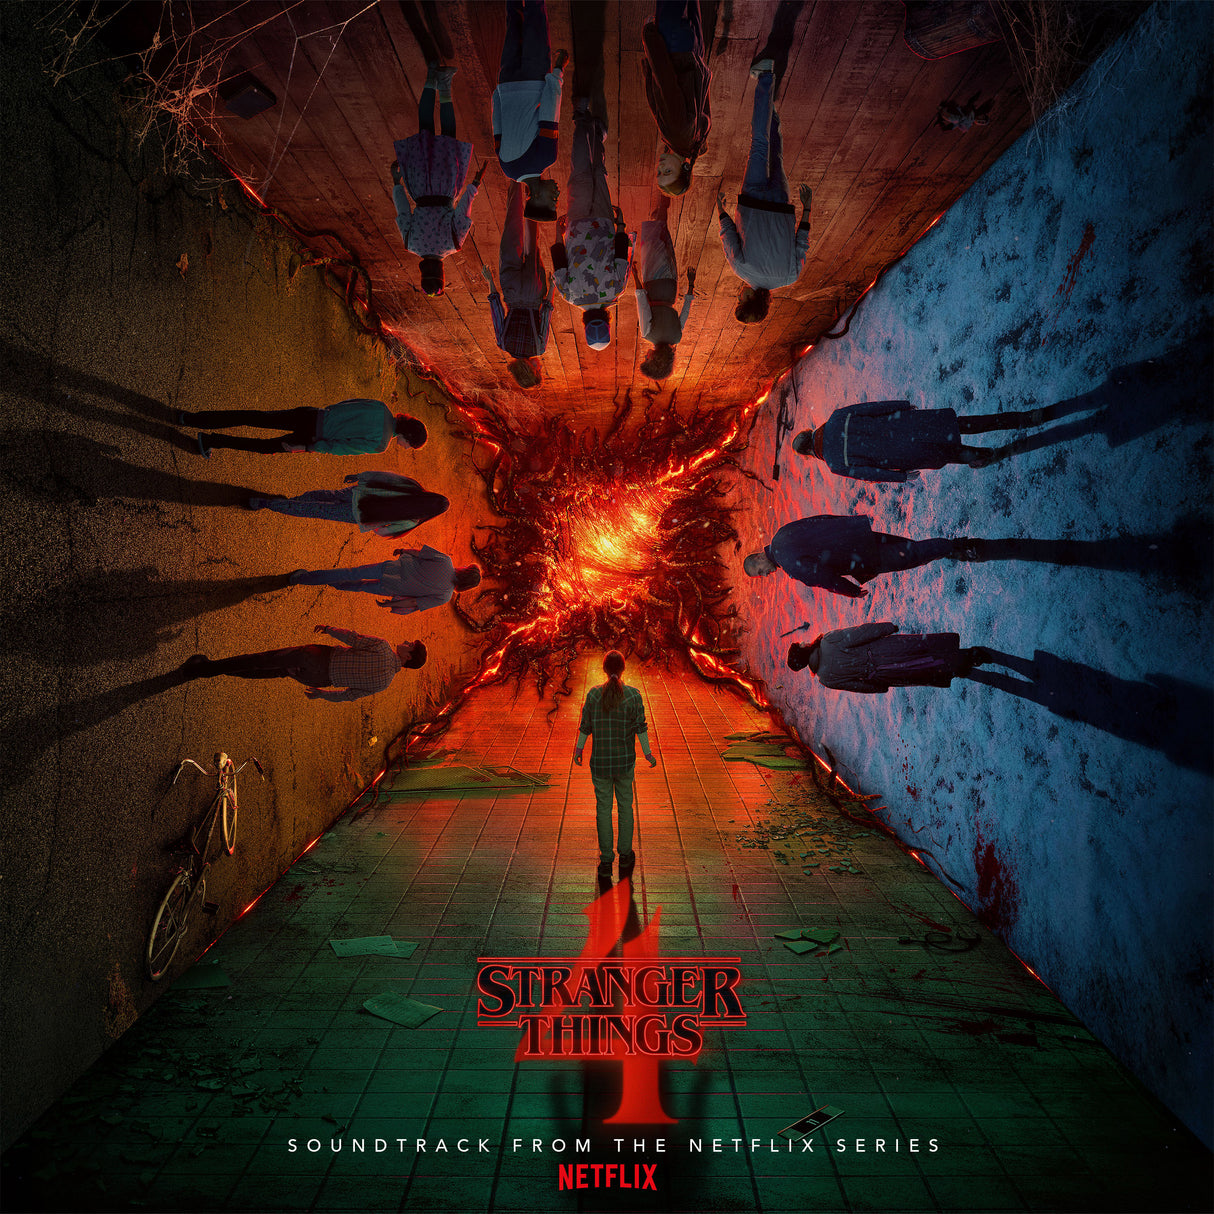 VARIOUS ARTISTS - Stranger Things 4 (Soundtrack From The Netflix Series) [Vinyl]